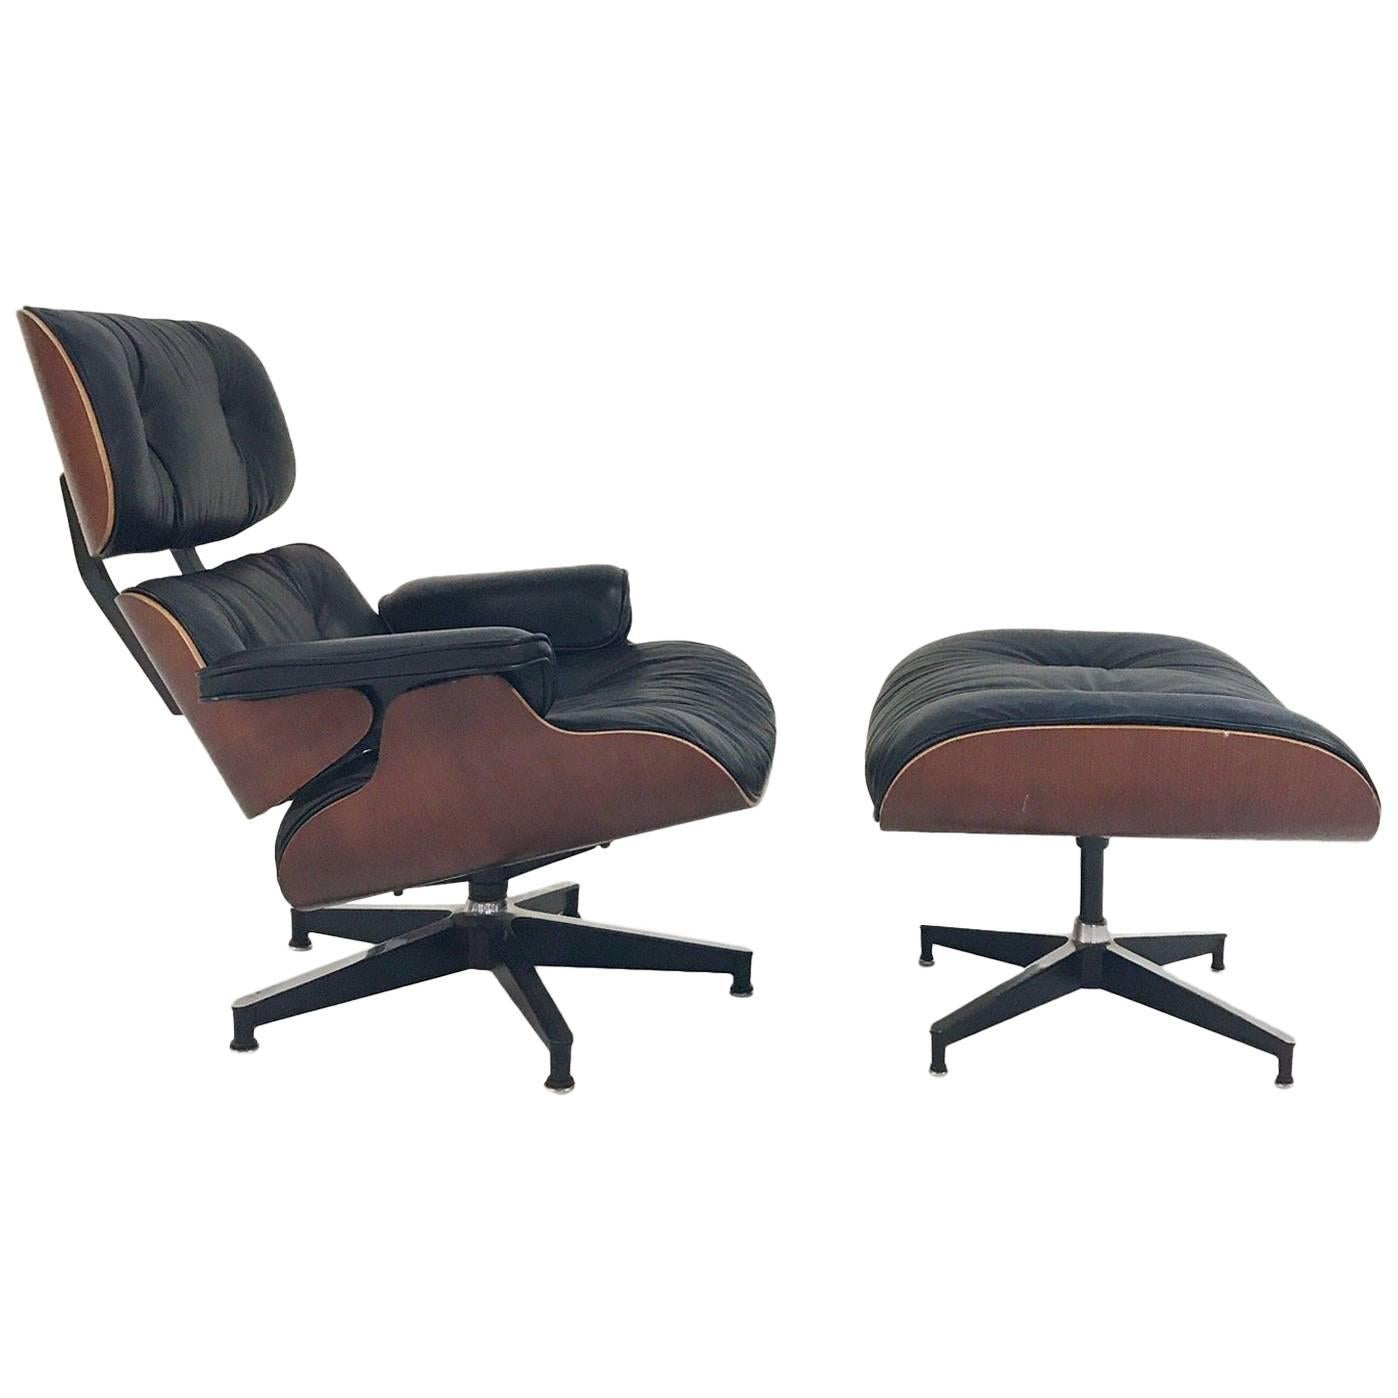 Vintage Charles and Ray Eames for Herman Miller 670 Lounge Chair & 671 Ottoman